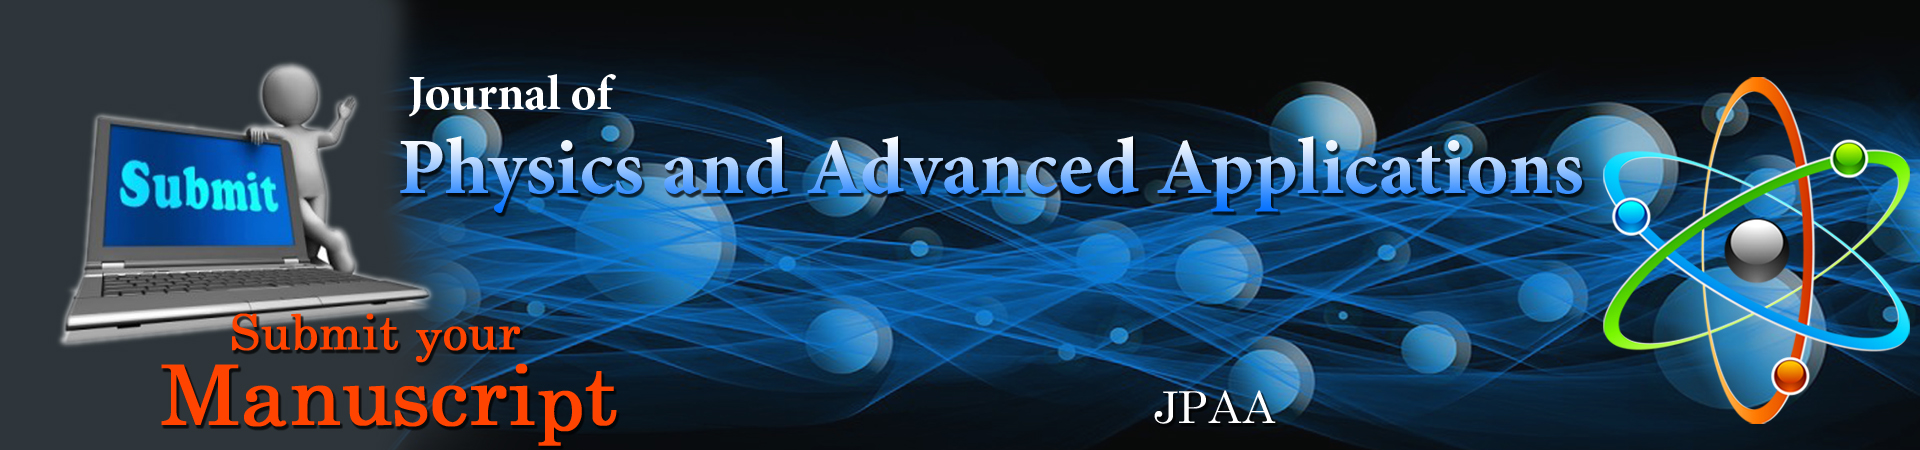 Journal of Physics and Advanced Applications